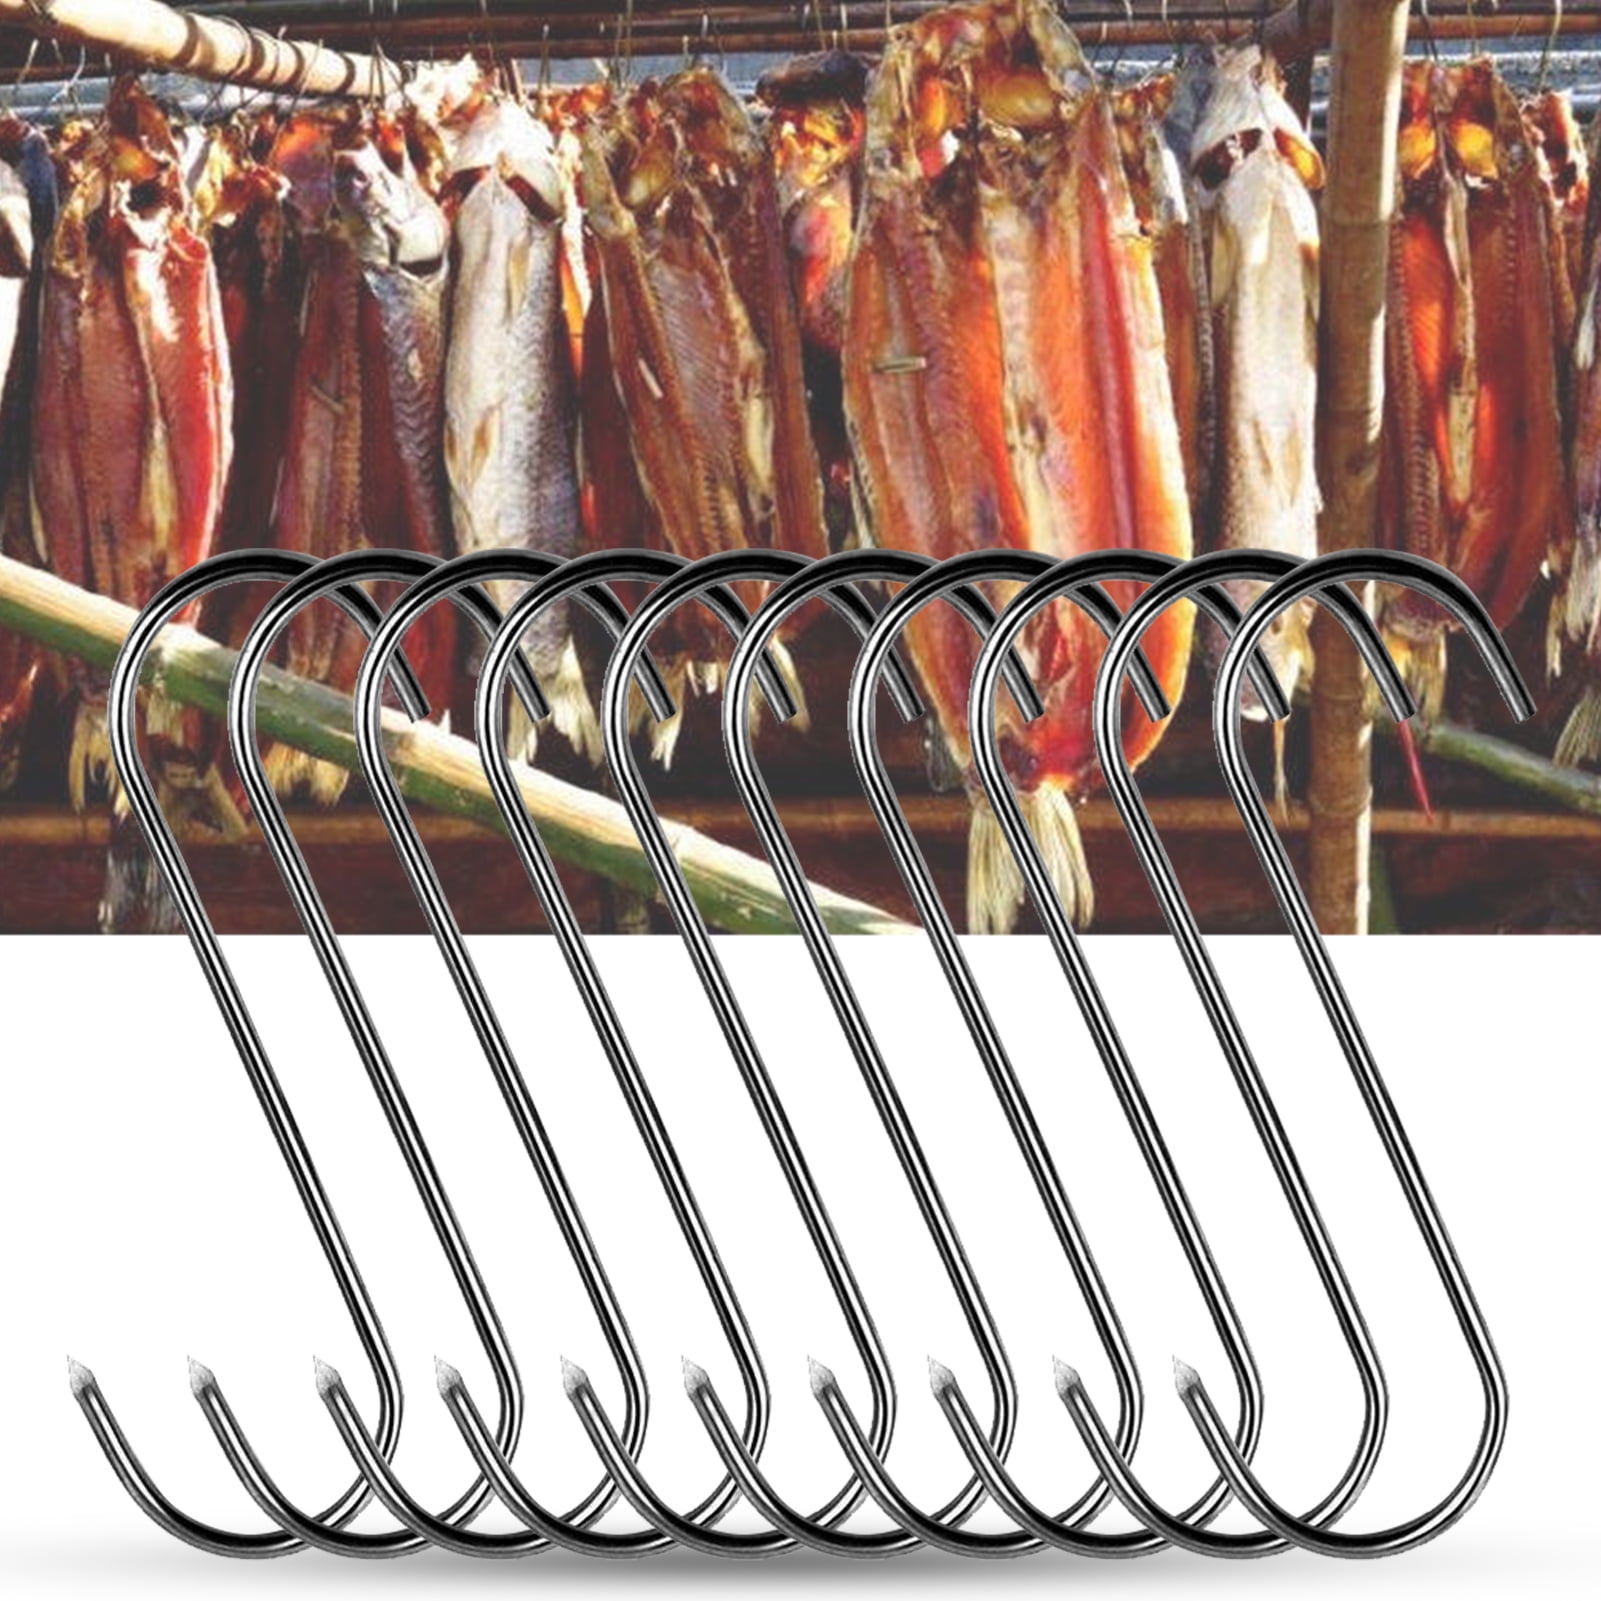 10 PCS Meat Hook,Stainless Steel Meat Hooks,Meat Hanging Hooks,Meat Hooks for Smoker,Stainless Steel Butcher Hook for BBQ Pork Sausage Bacon Hams Chicken Duck Turkey Poultry Smoker Curing Roast 